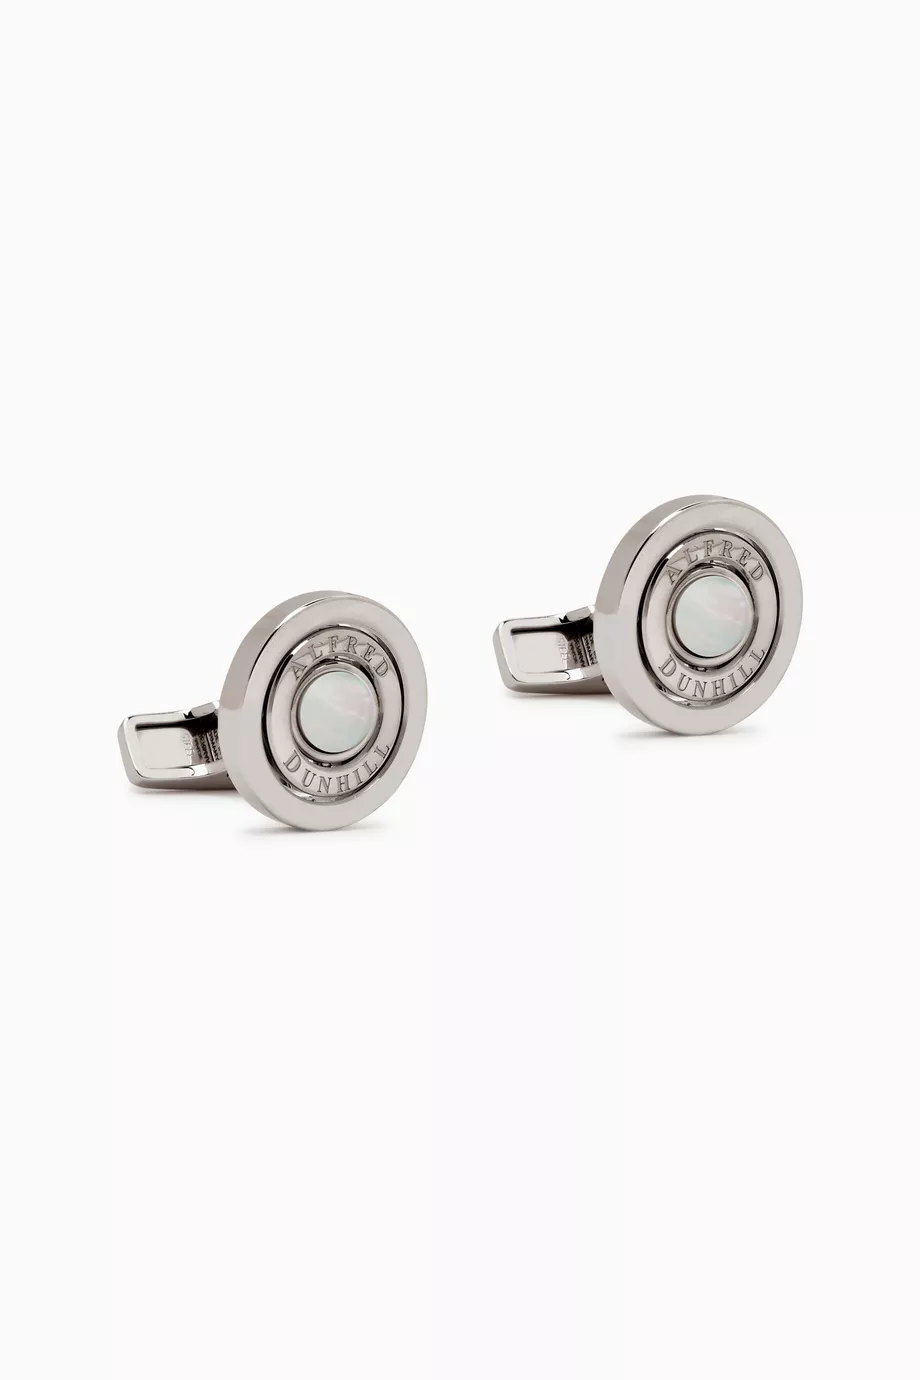 Buy Dunhill Silver Gyro Cufflinks with Mother of Pearl in Sterling